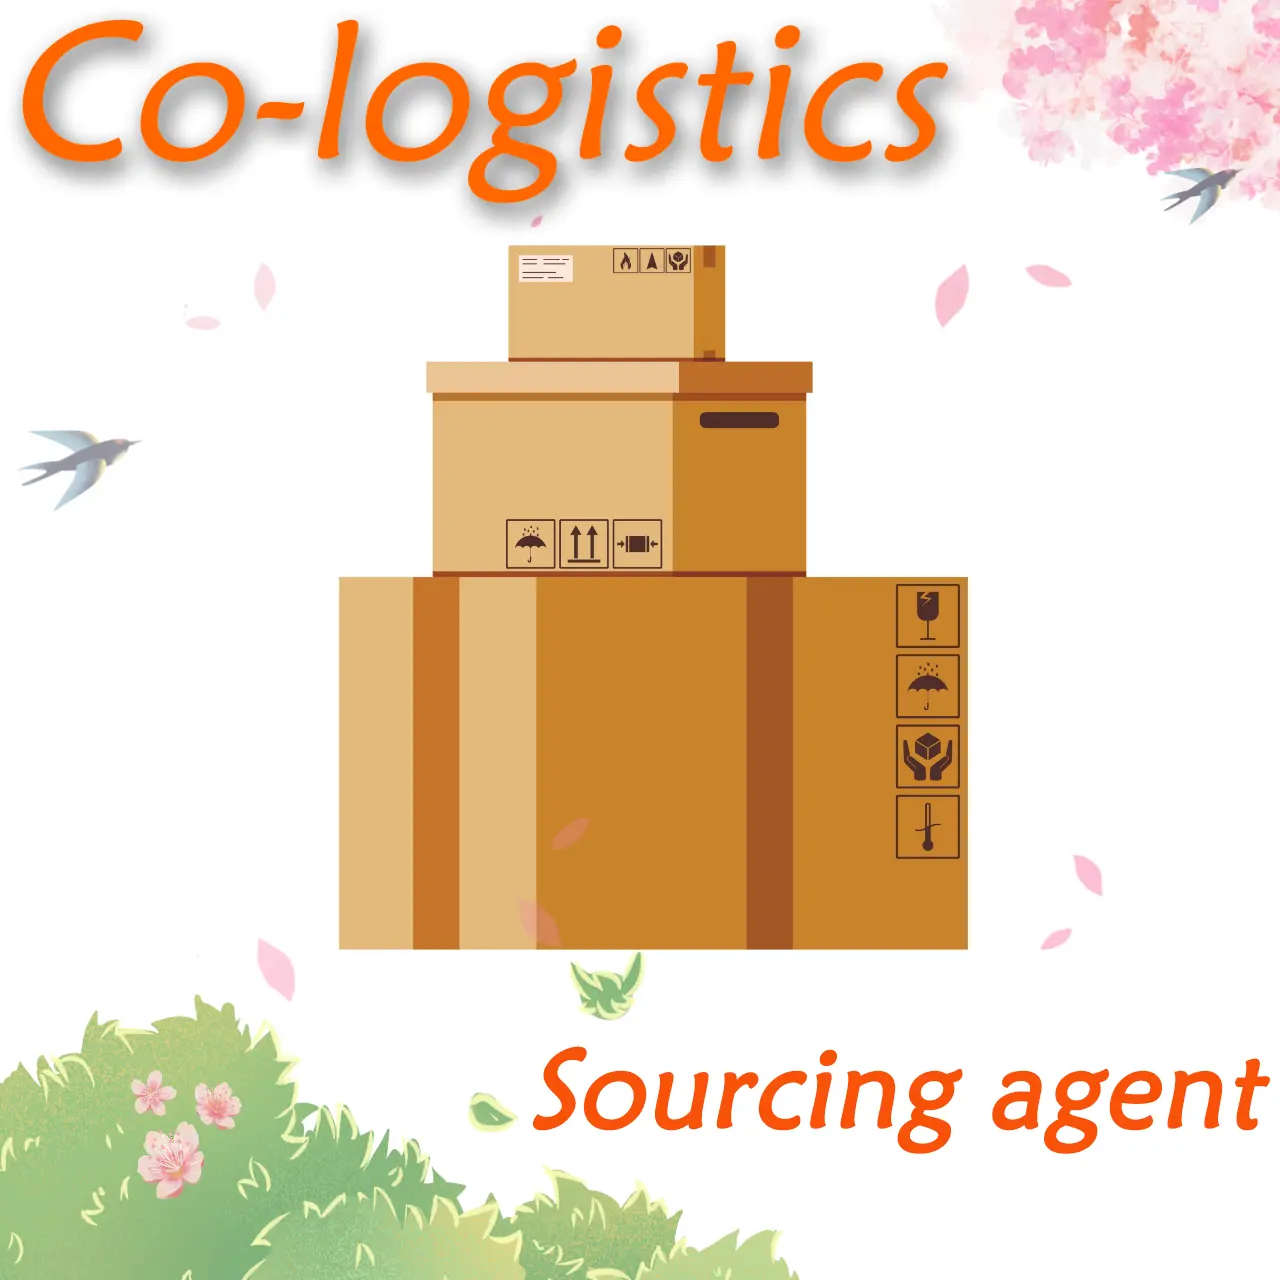 Storage warehouse service shipping cost from China to UK Europe